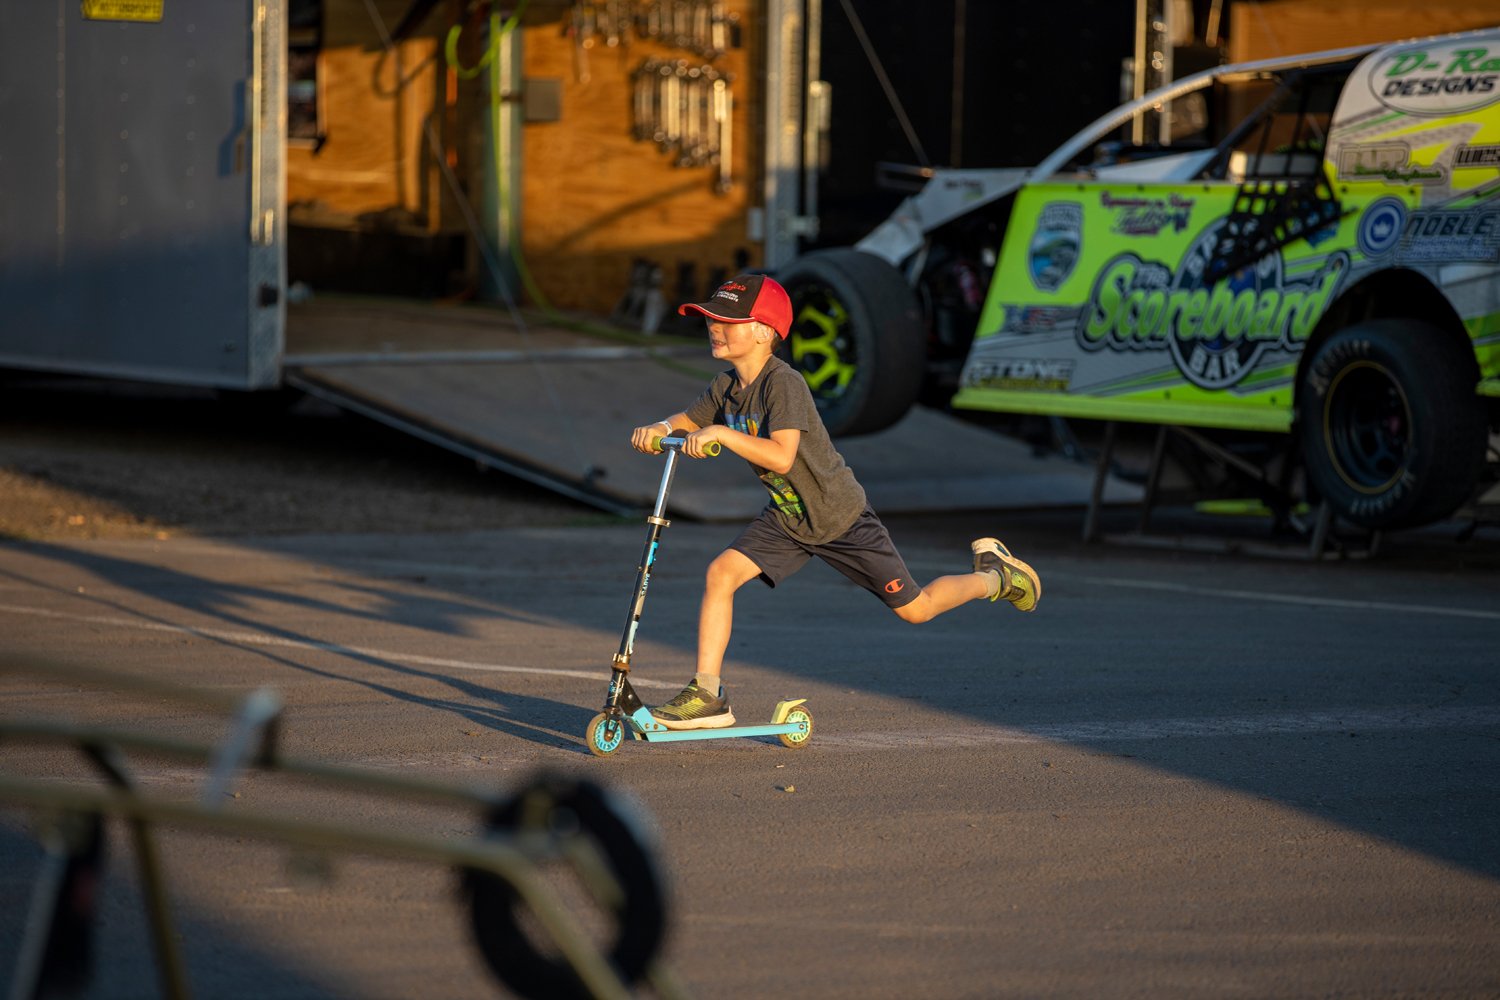  A racer's son flies by on a scooter in the pit Saturday at Willamette Speedway in Lebanon, Ore. The pit is full of racers, with kids in tow, working on their cars and karts prepping for their qualifying races or making tweaks before their final race